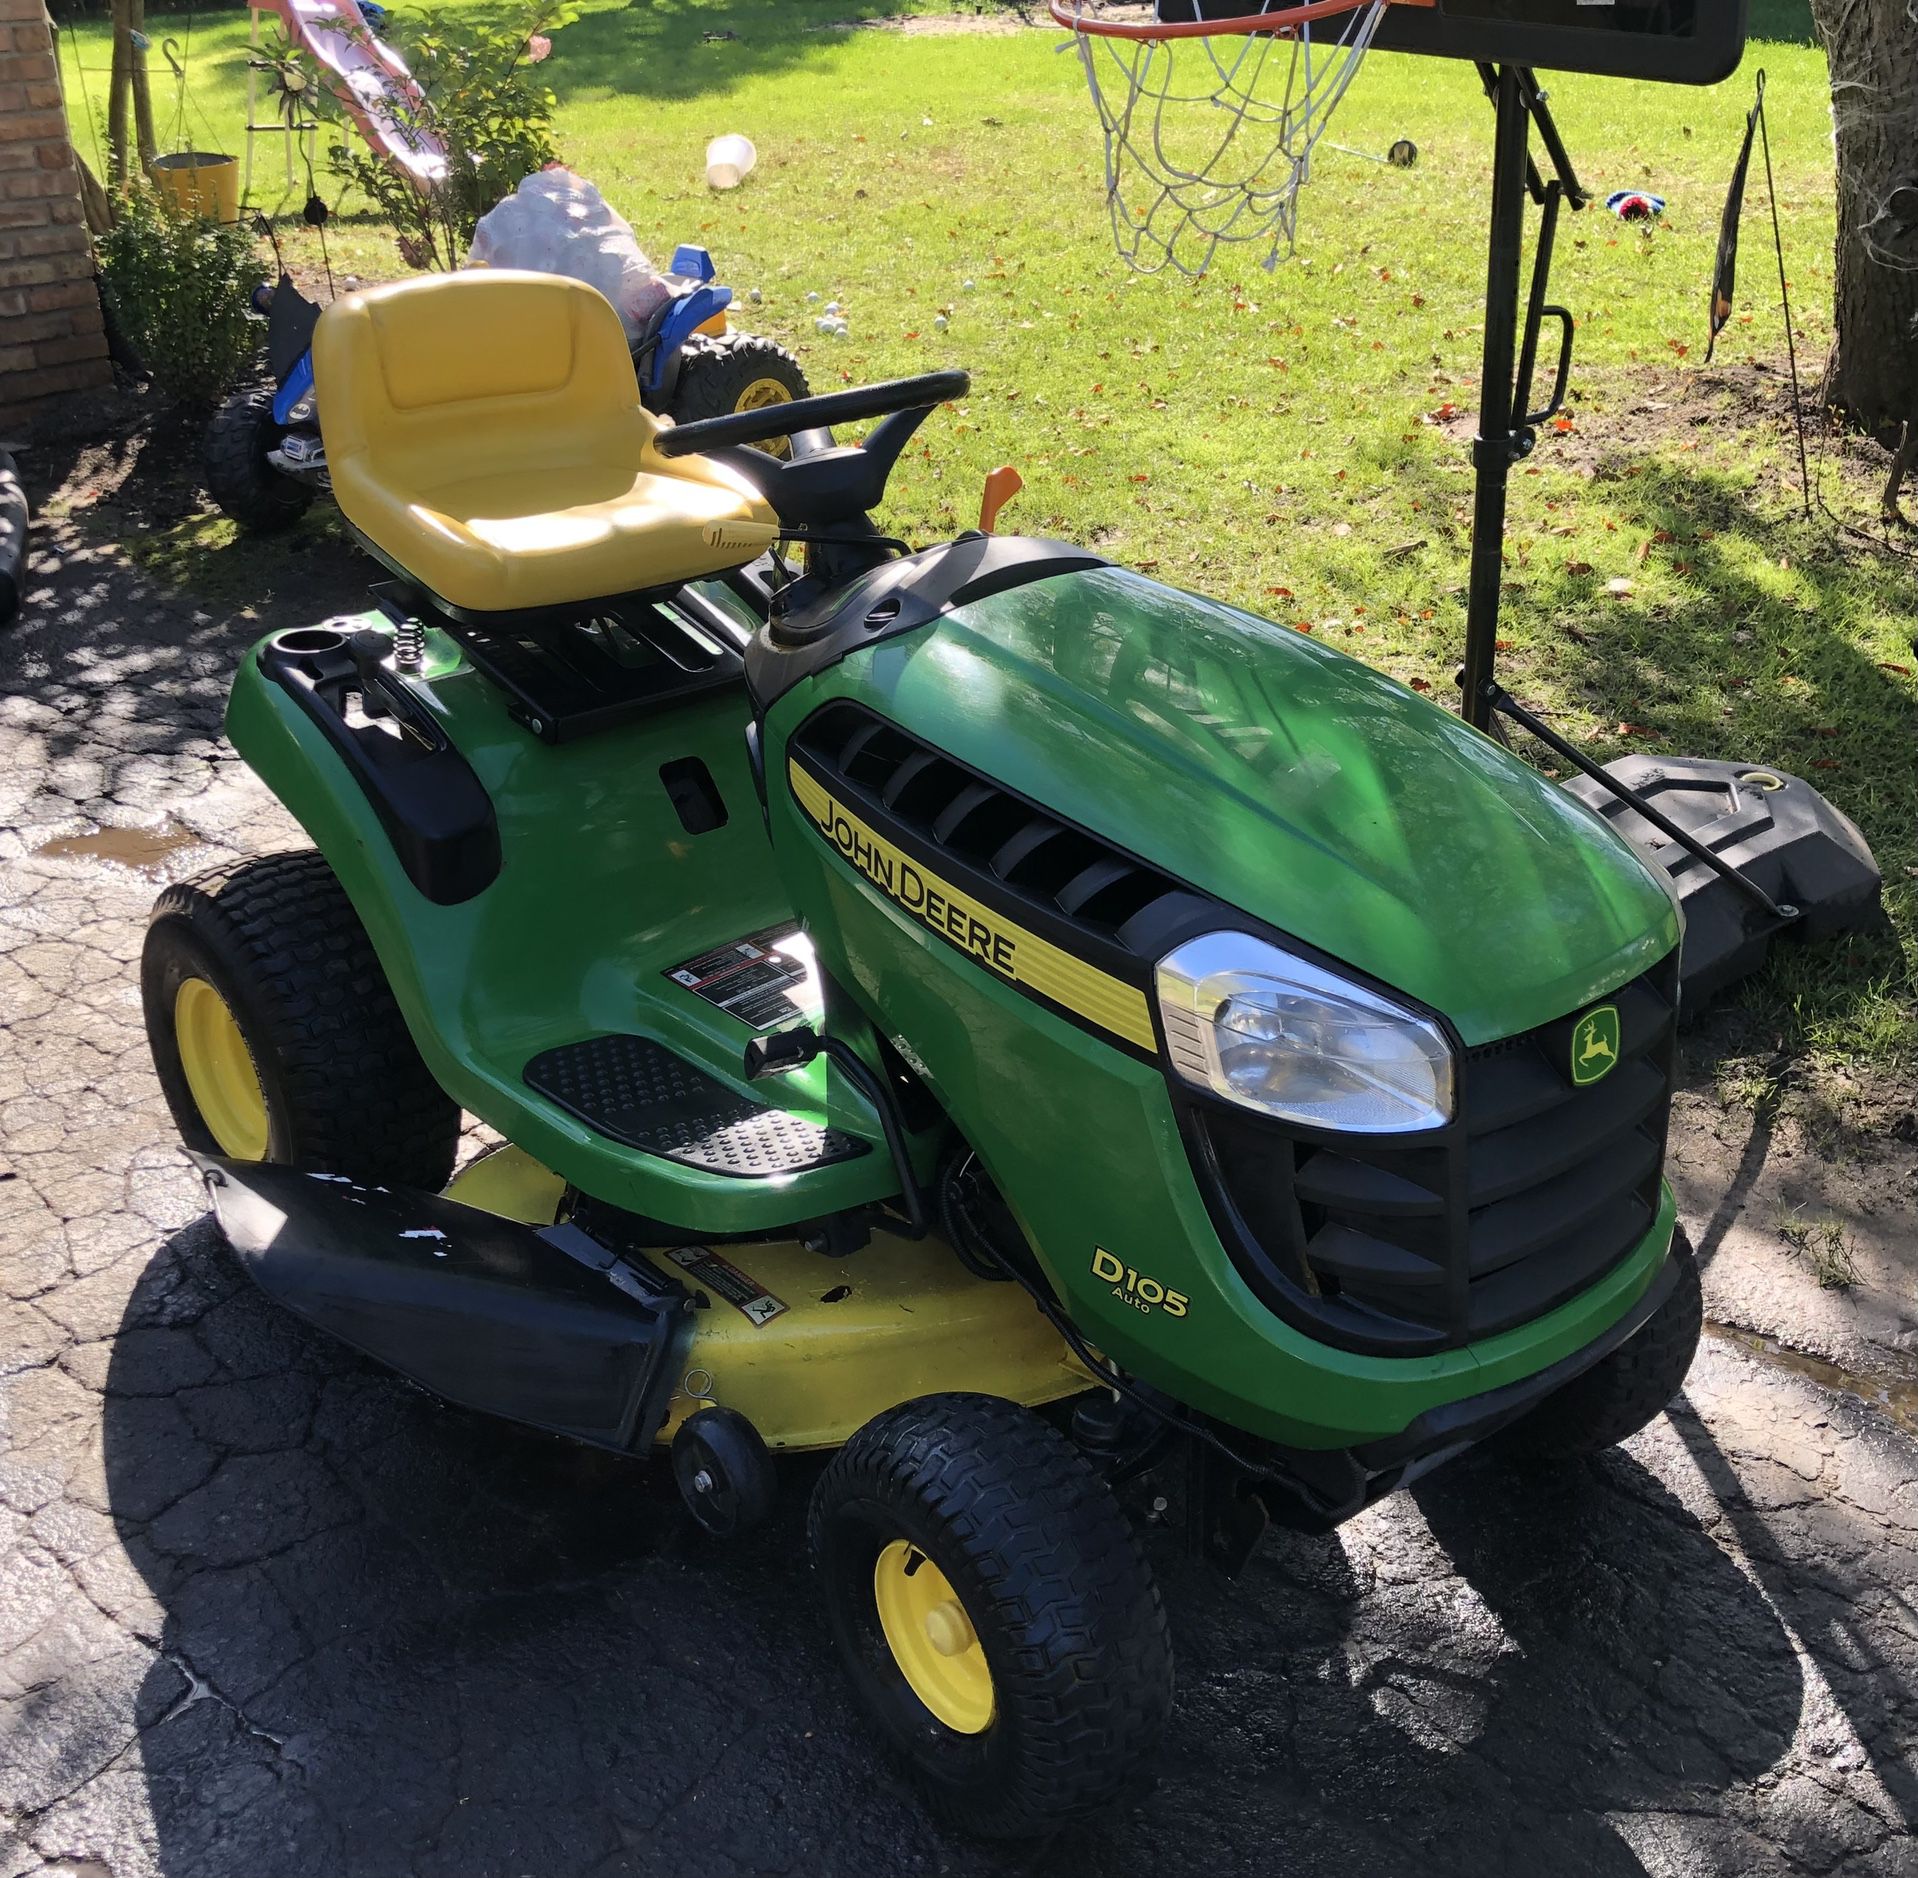 2017 John Deere 42” 200hrs Riding Lawn Mower $950 Delivered 